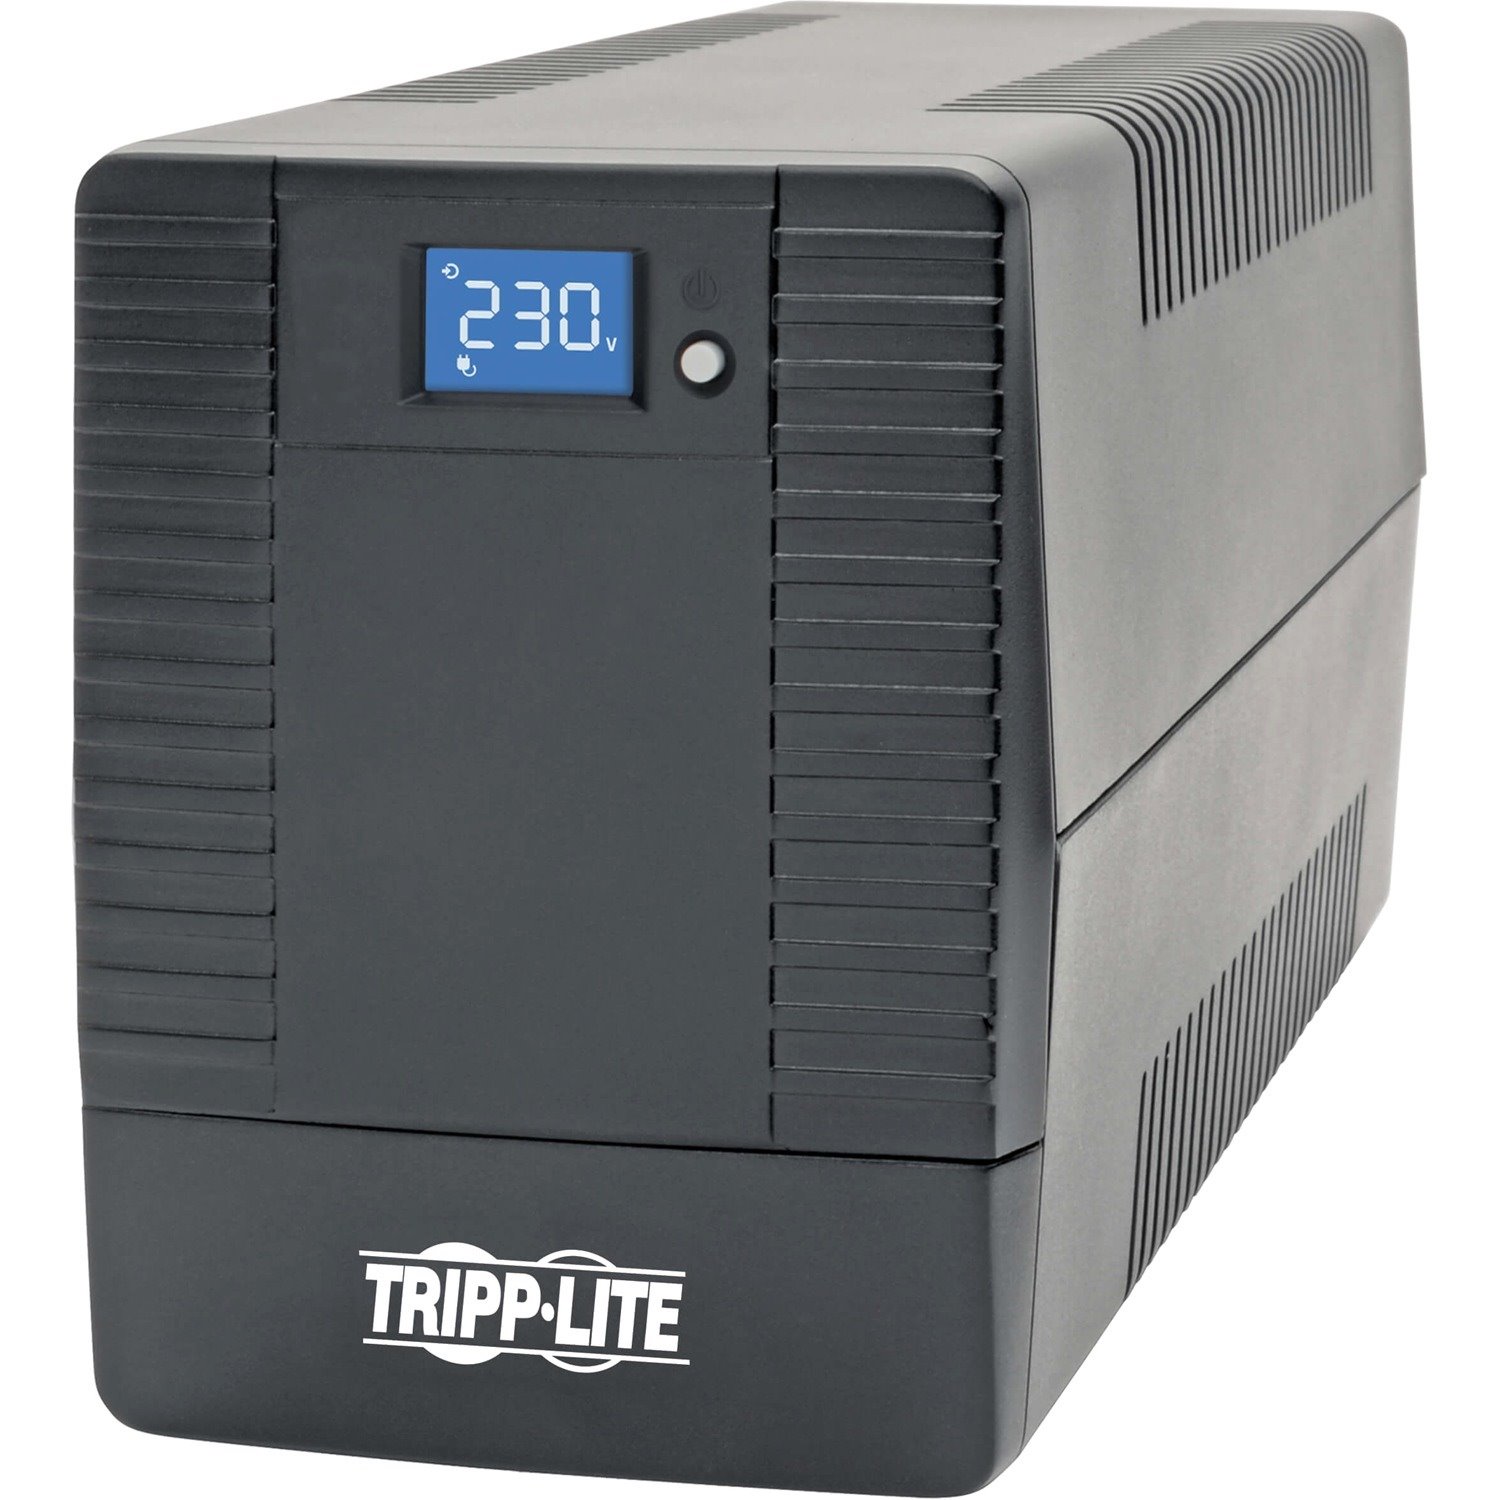 Tripp Lite 850VA 480W 230V Line-Interactive UPS - 6 C13 Outlets, 2 Australian Outlet Adapters, LCD, USB, Tower